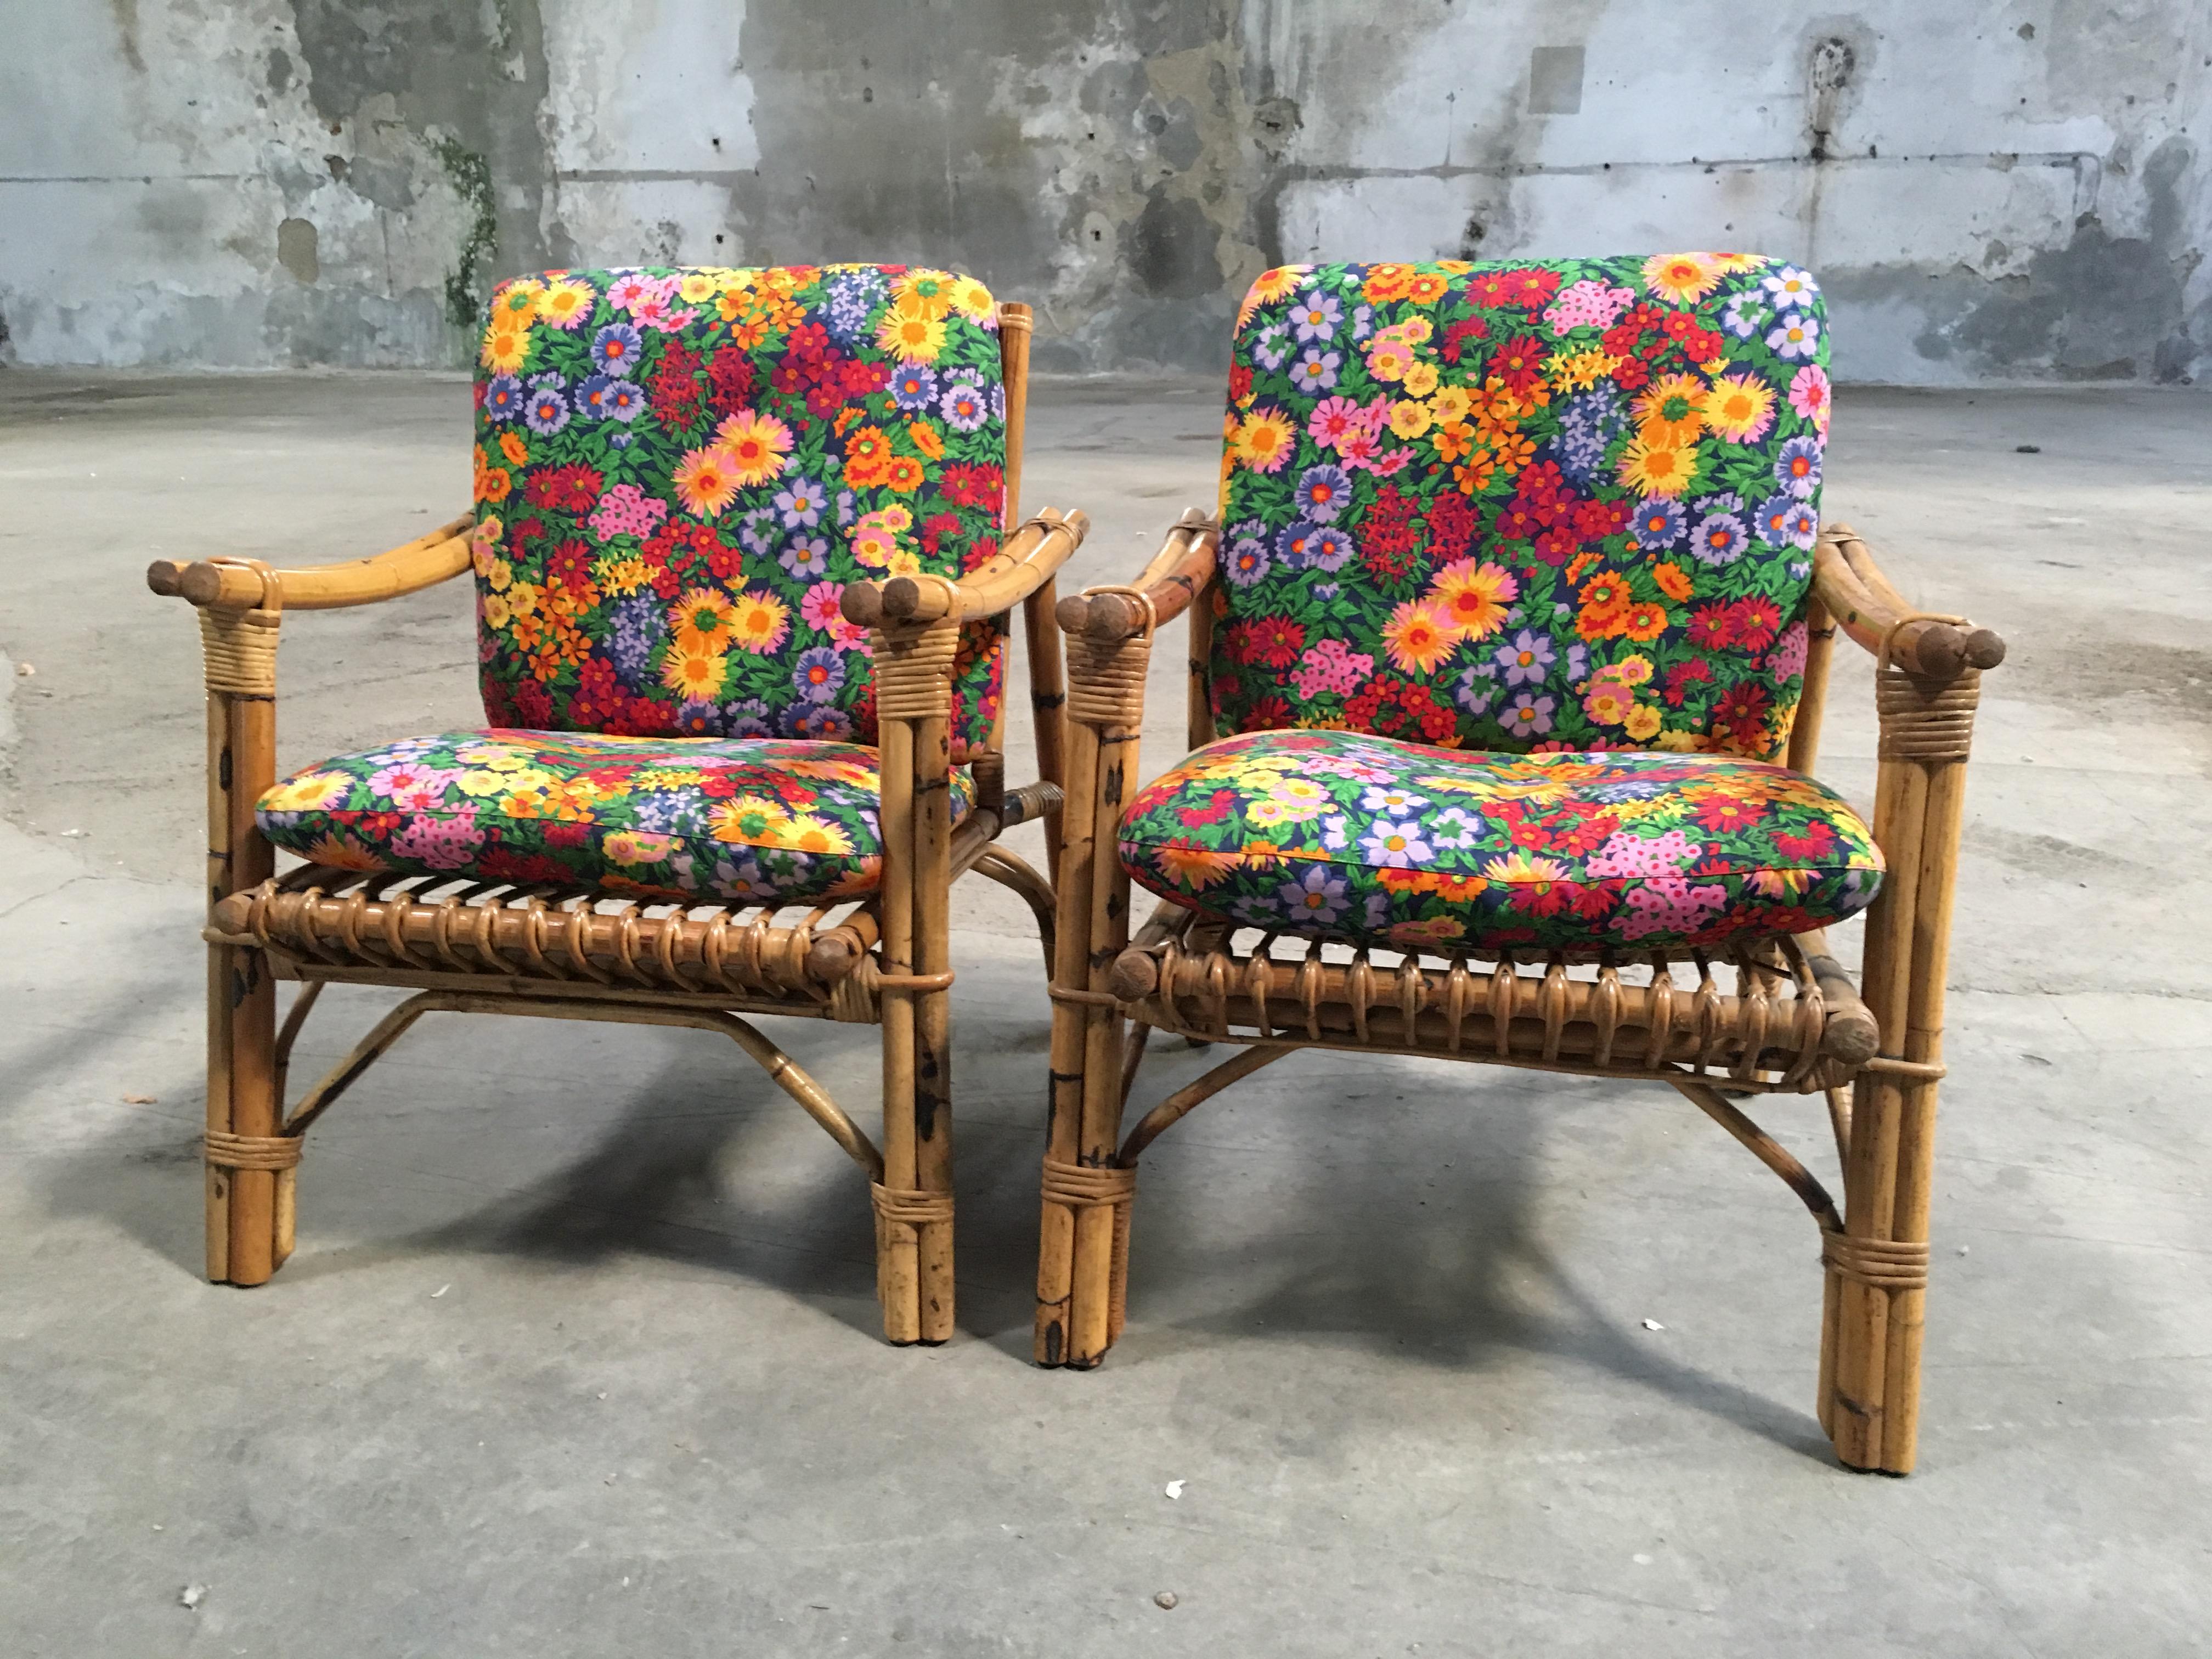 Mid-Century Modern pair of Italian bamboo armchairs with original floral cushions from 1960s.
These armchairs could be sold together the bamboo sofa visible in the pictures
Price of the set on demand.